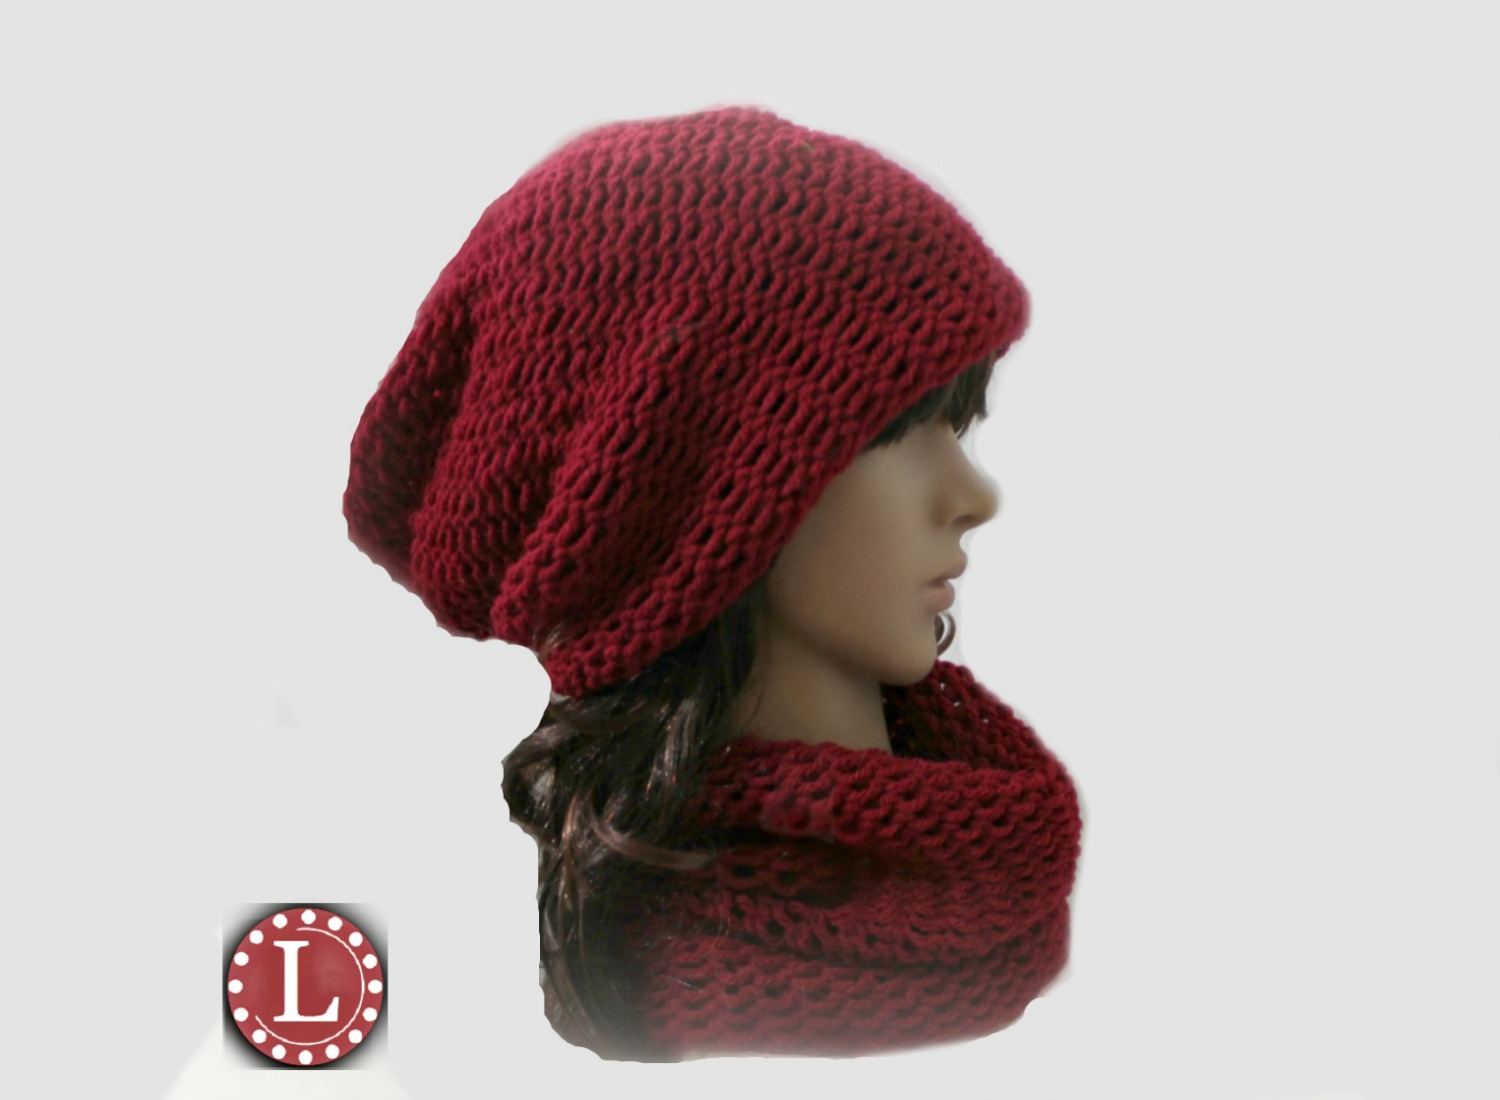  Loom Knit Hats Pattern Book, Easy Hat Patterns & How